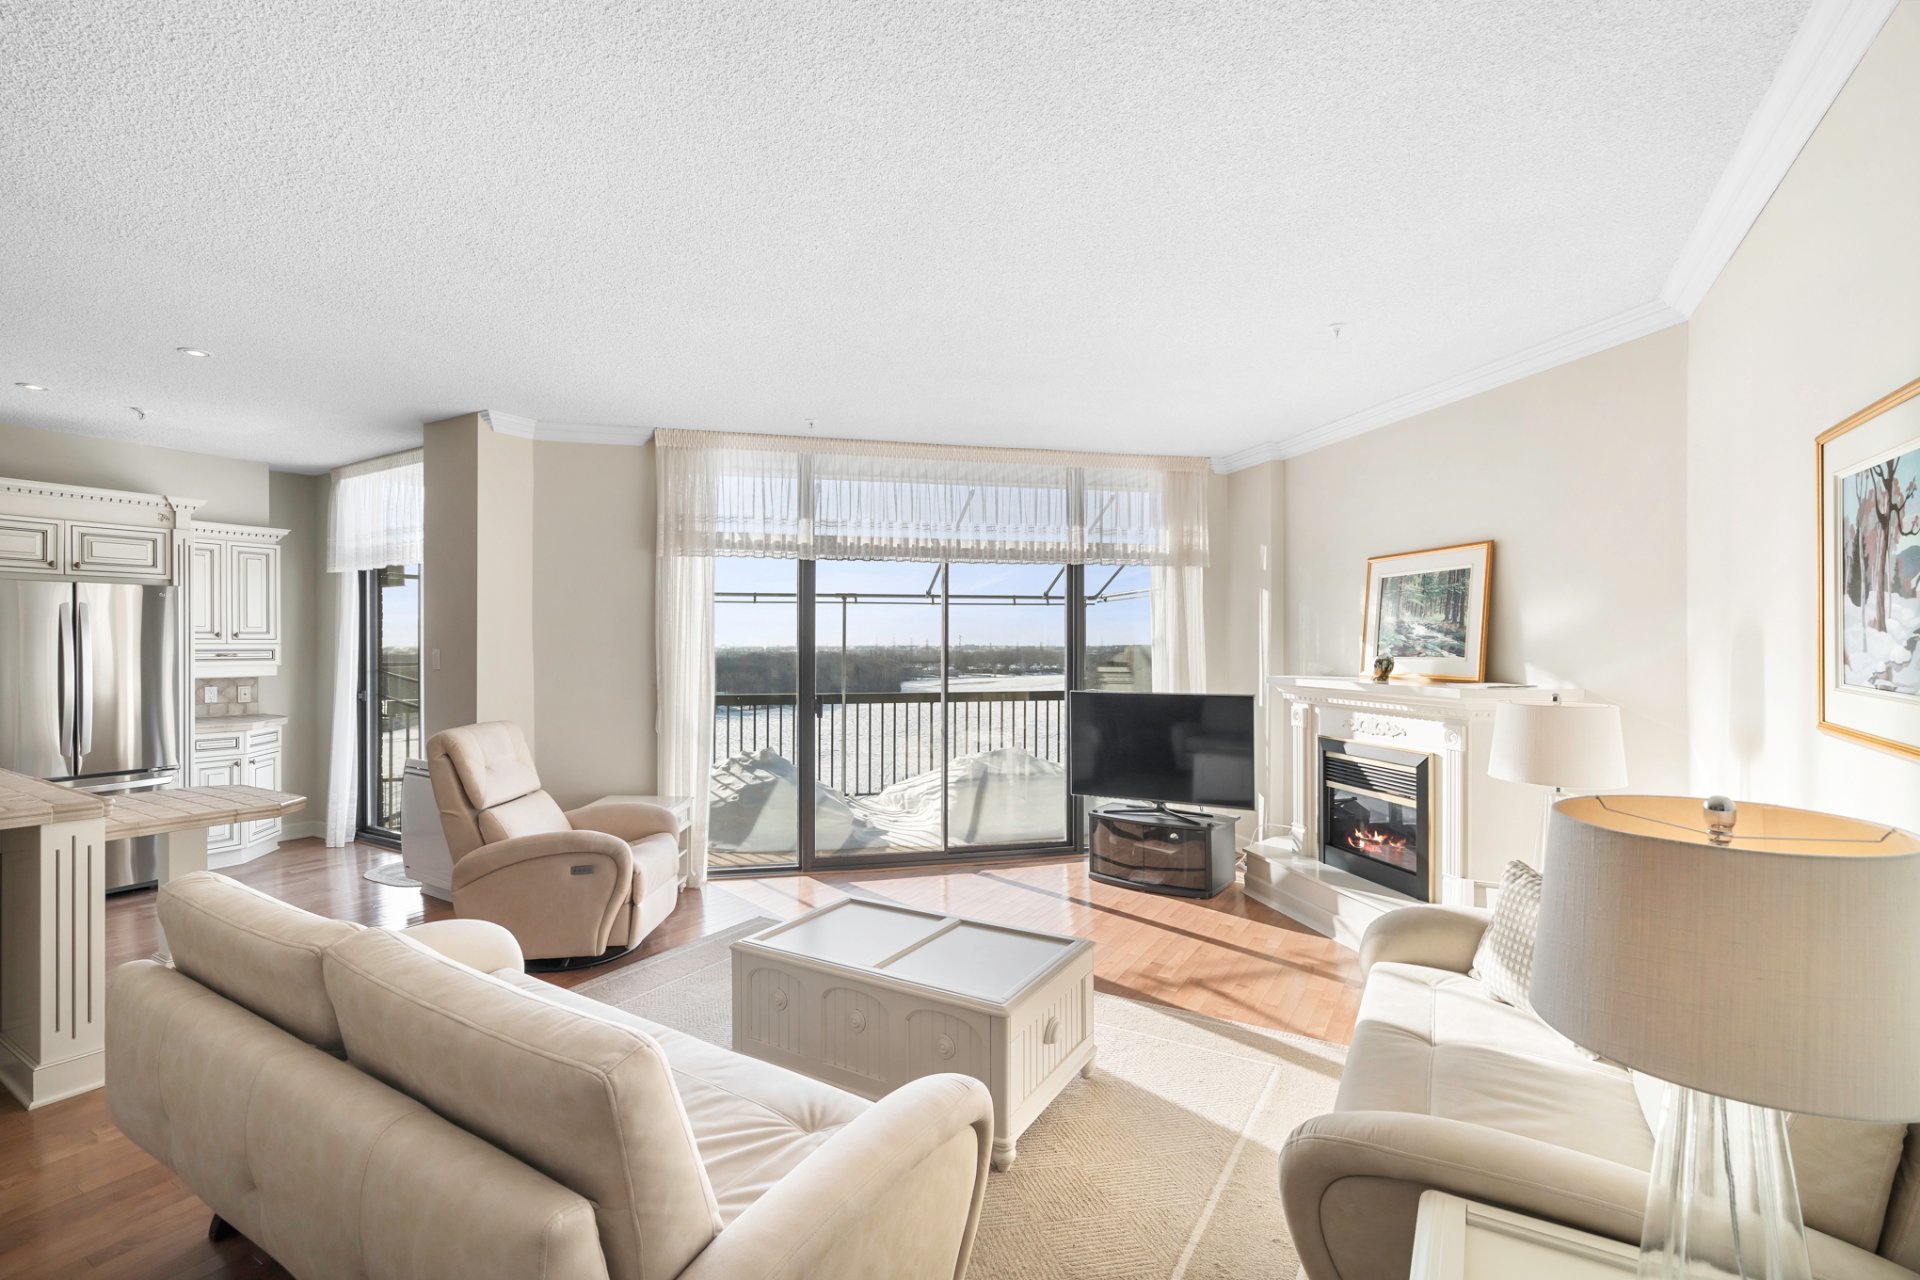 Apartment / Condo for sale, Chomedey